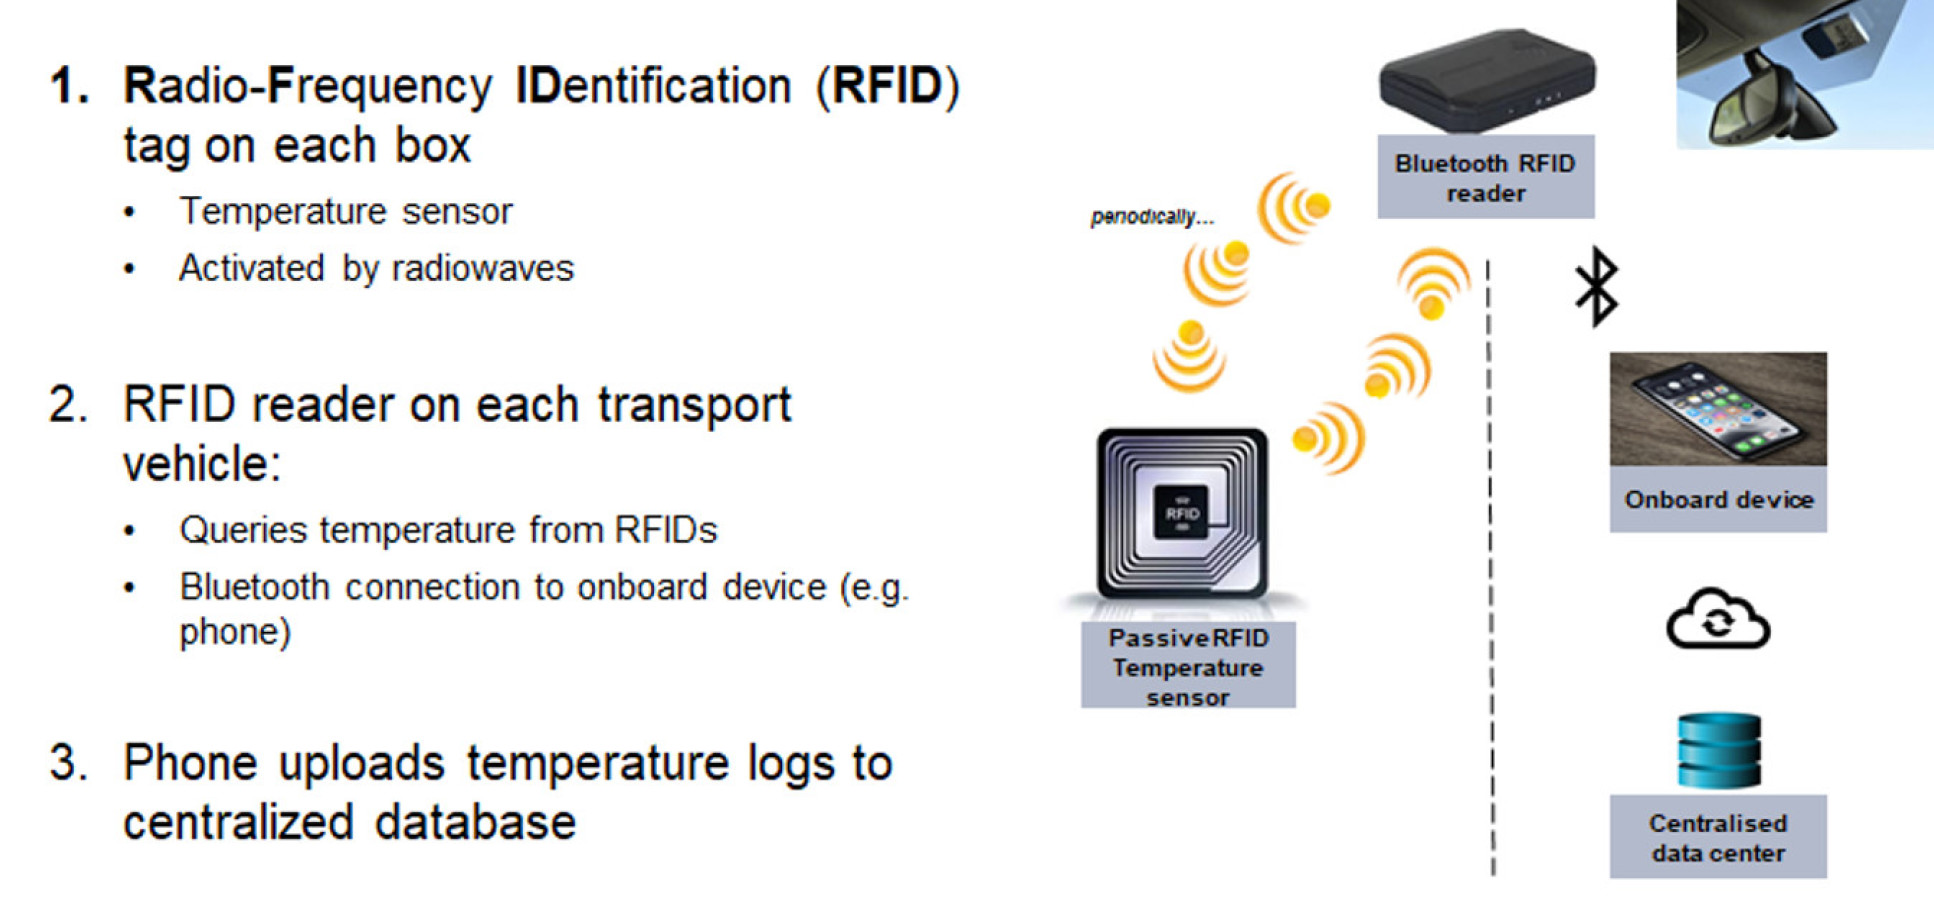 A slide going into more detail about the box labels, including images of the Radio-Frequency IDentification (RFID) tag for each box, which is a temperature sensor activated by radio waves; the RFID reader on each transport vehicle that's connected via Bluetooth to an onboard device (e.g. the driver's mobile phone); and an illustration of the centralised database where the information is stored